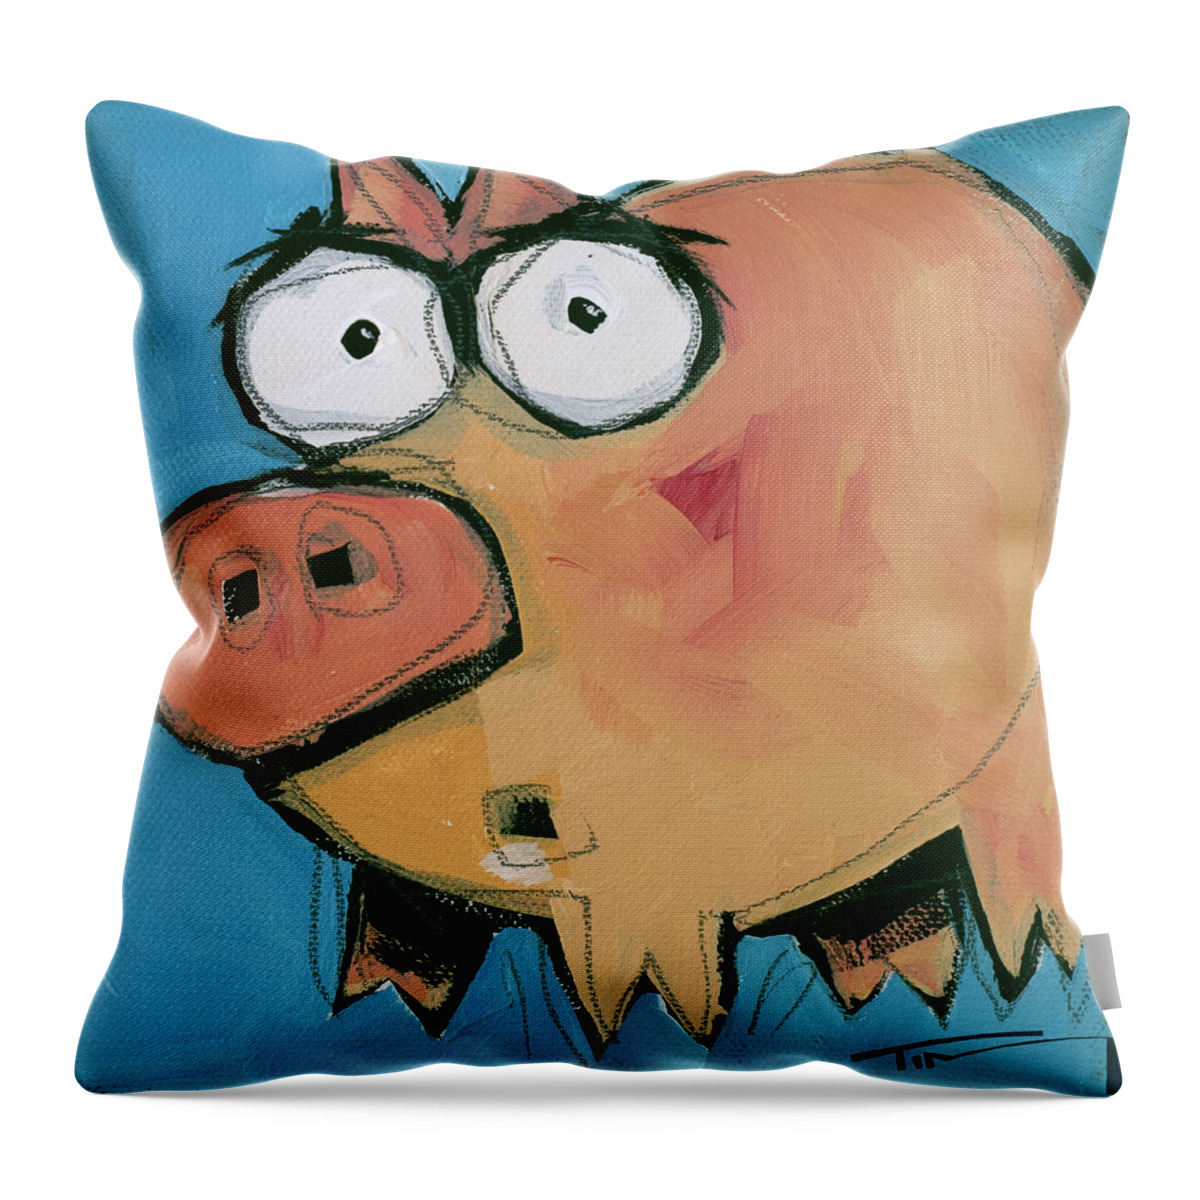 Pig Throw Pillow featuring the painting Flying Pig 1 by Tim Nyberg